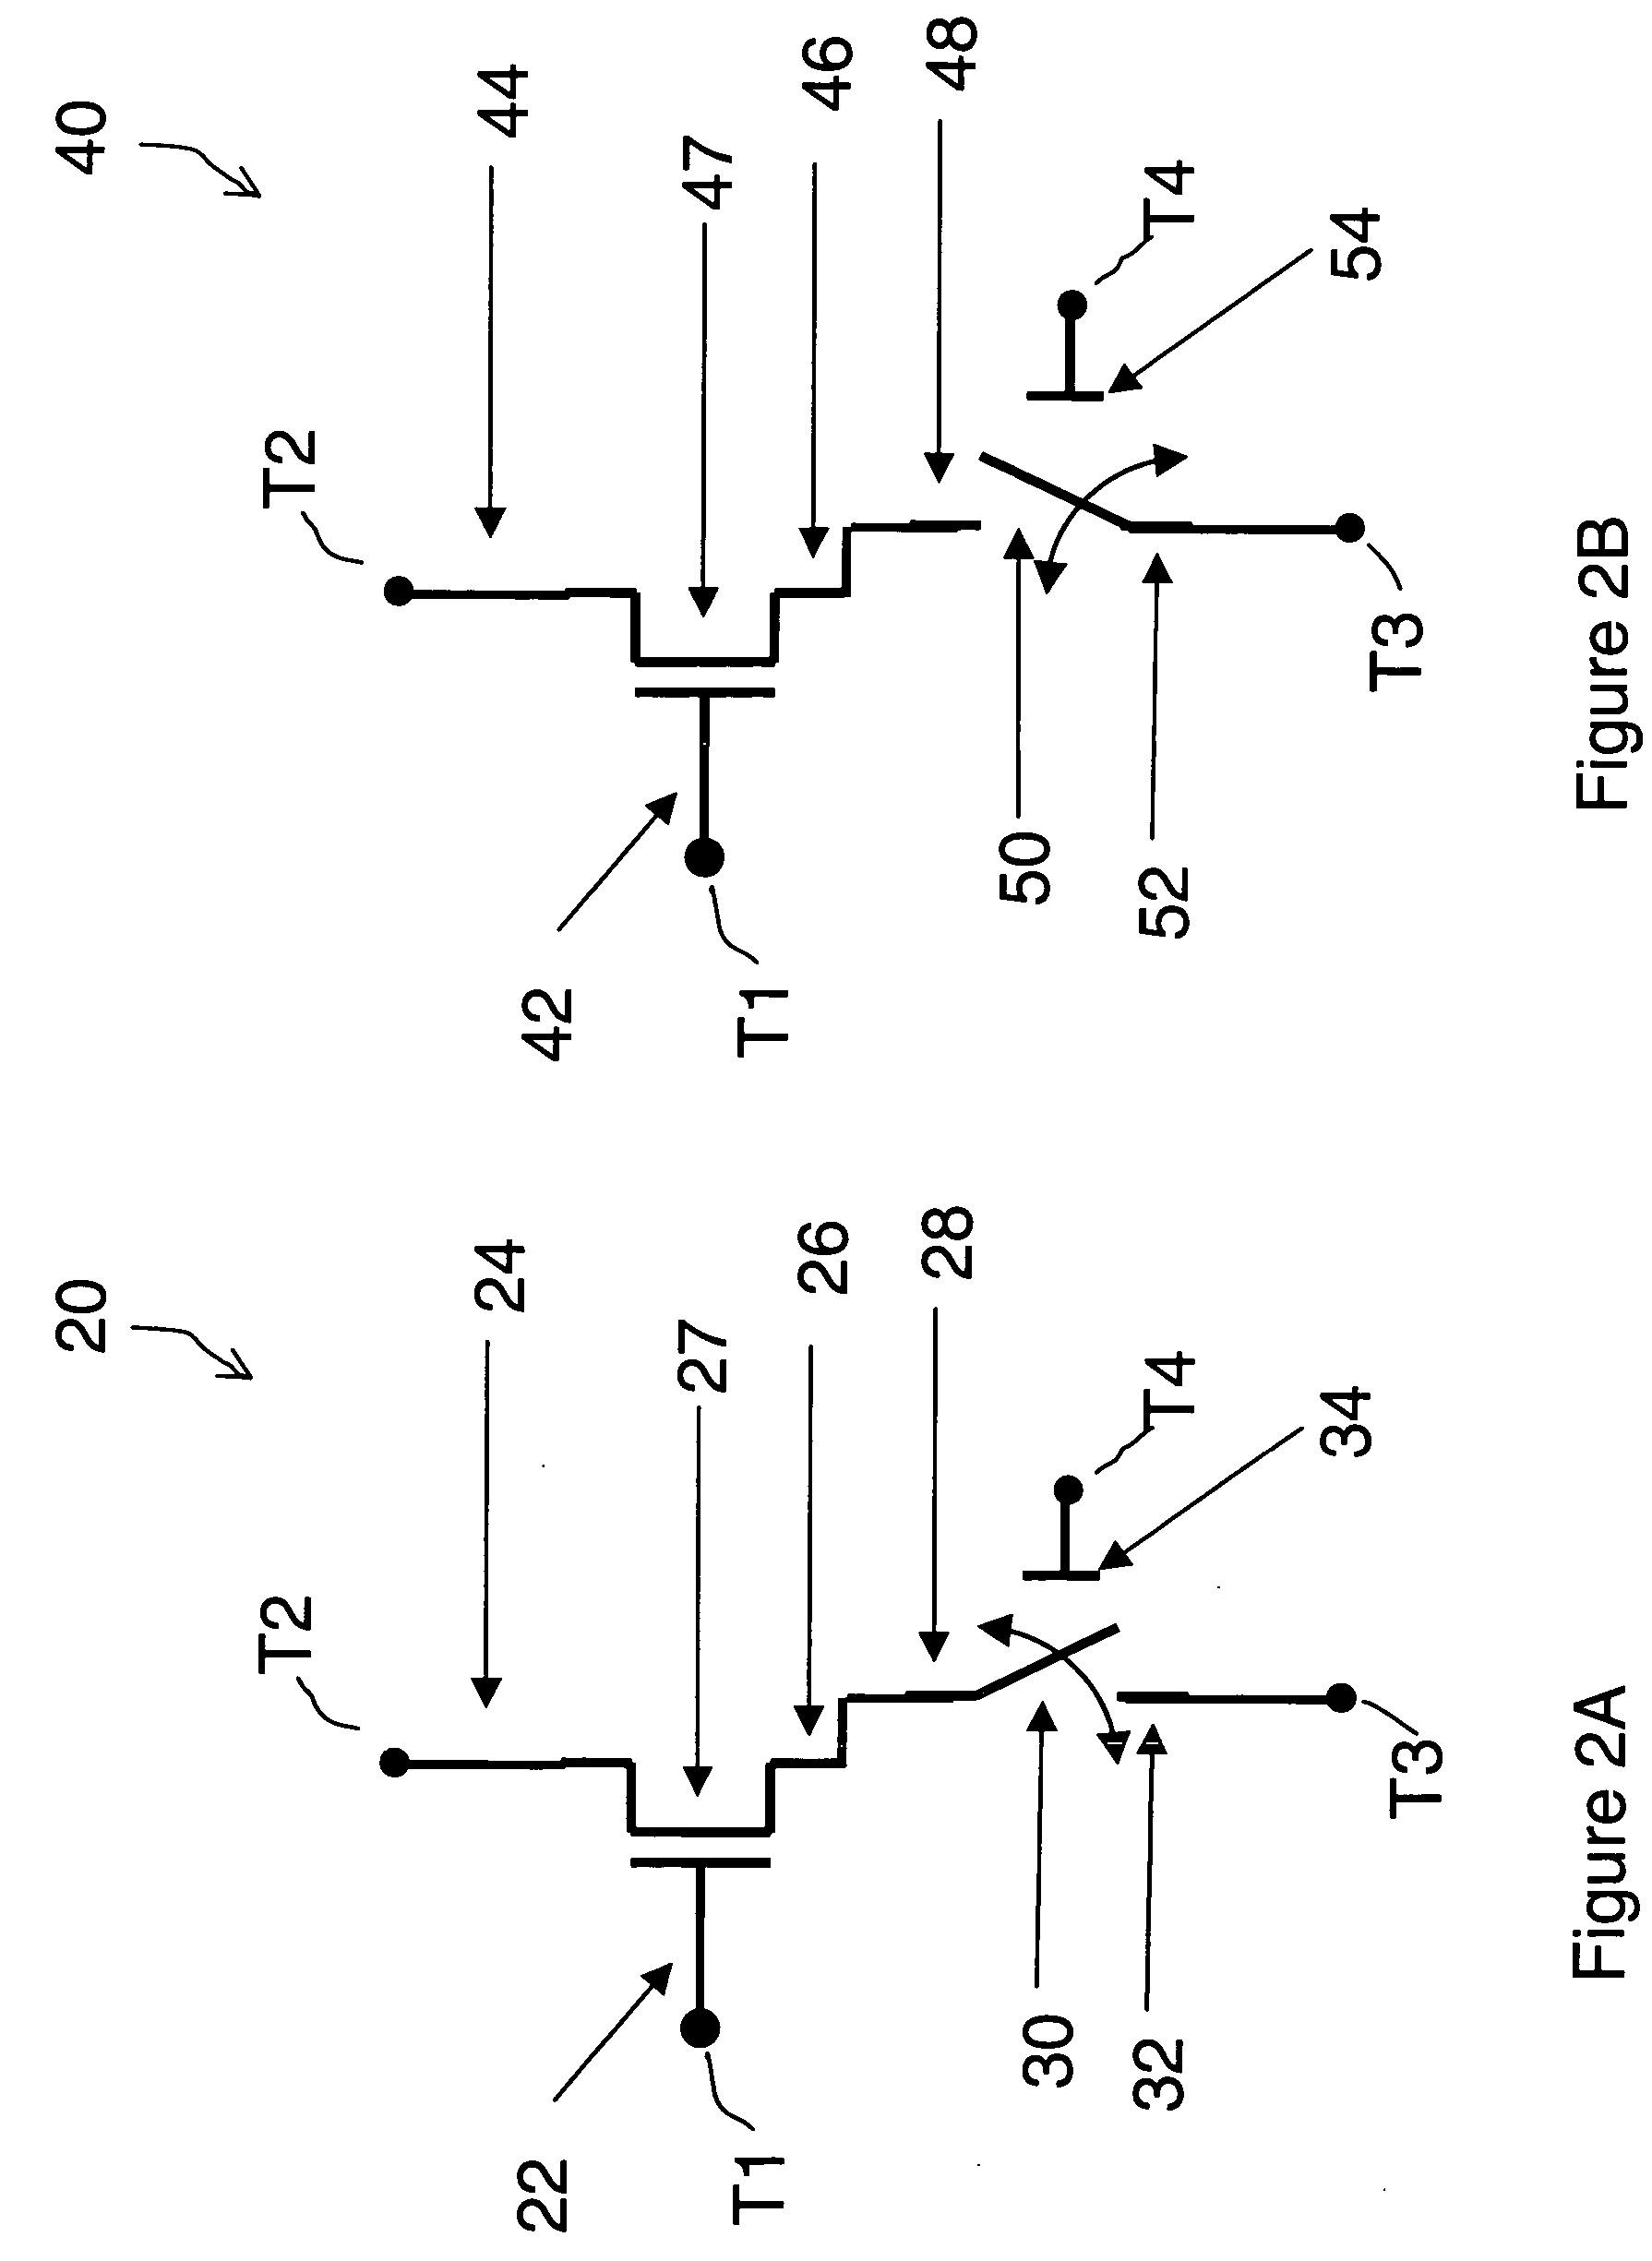 Field effect devices having a drain controlled via a nanotube switching element